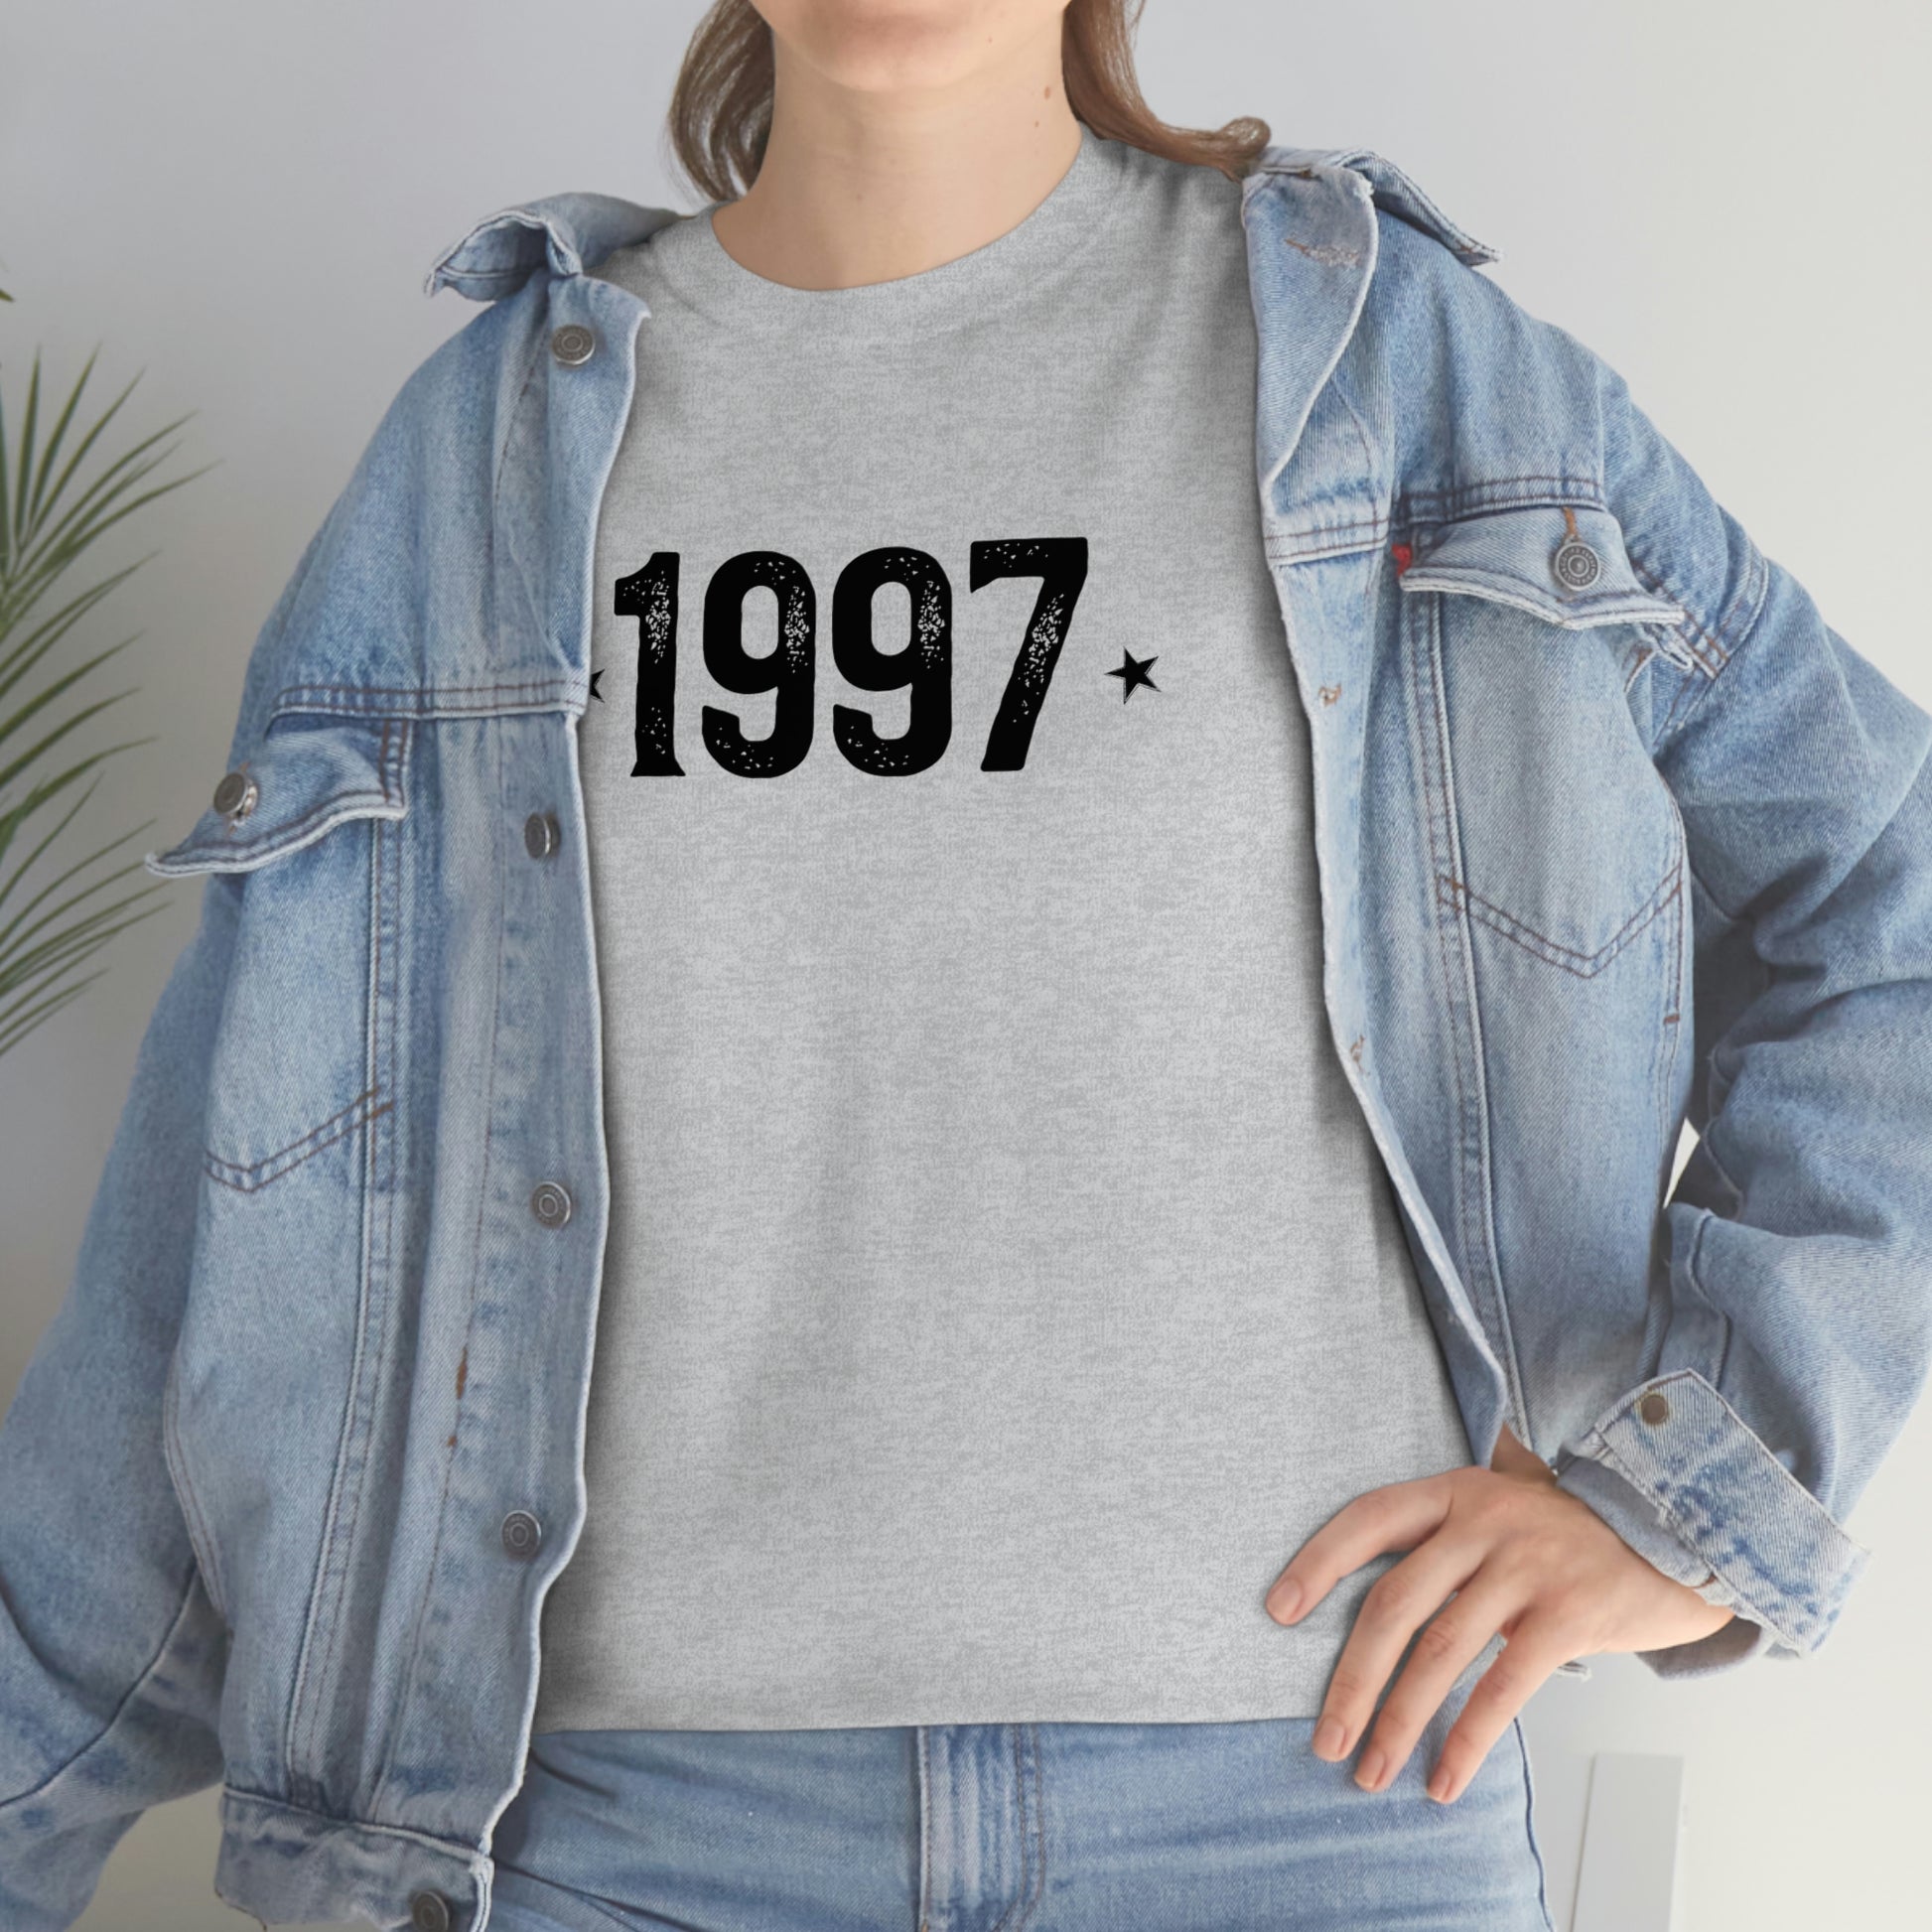 "1997 Year" T-Shirt - Weave Got Gifts - Unique Gifts You Won’t Find Anywhere Else!